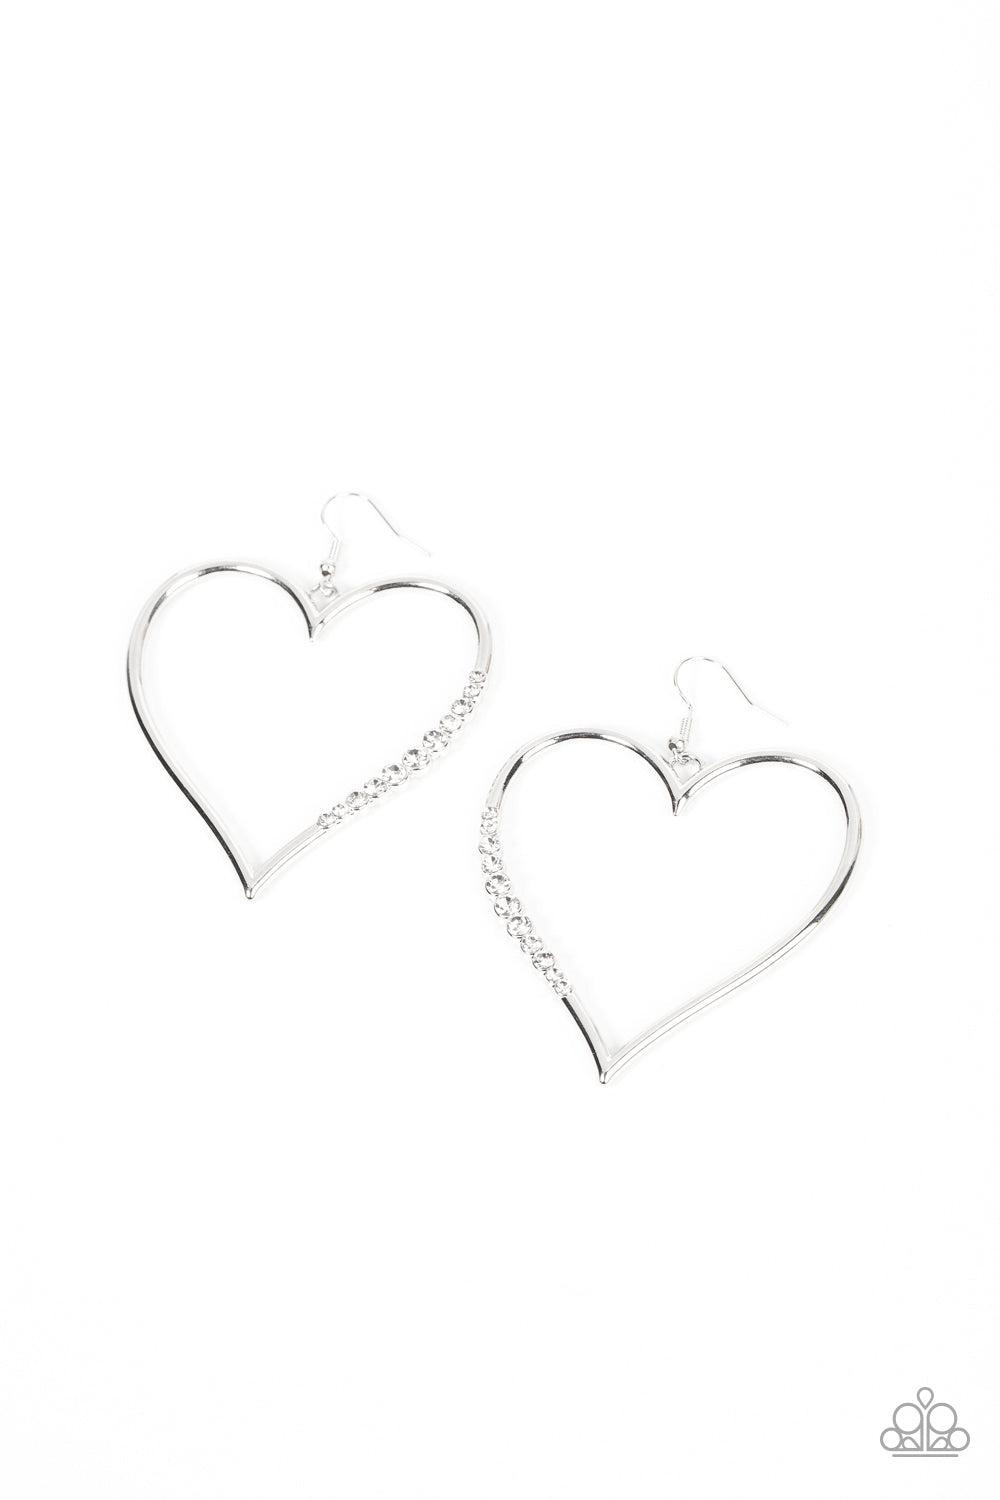 Bewitched Kiss White Rhinestone Heart Earrings - Paparazzi Accessories- lightbox - CarasShop.com - $5 Jewelry by Cara Jewels